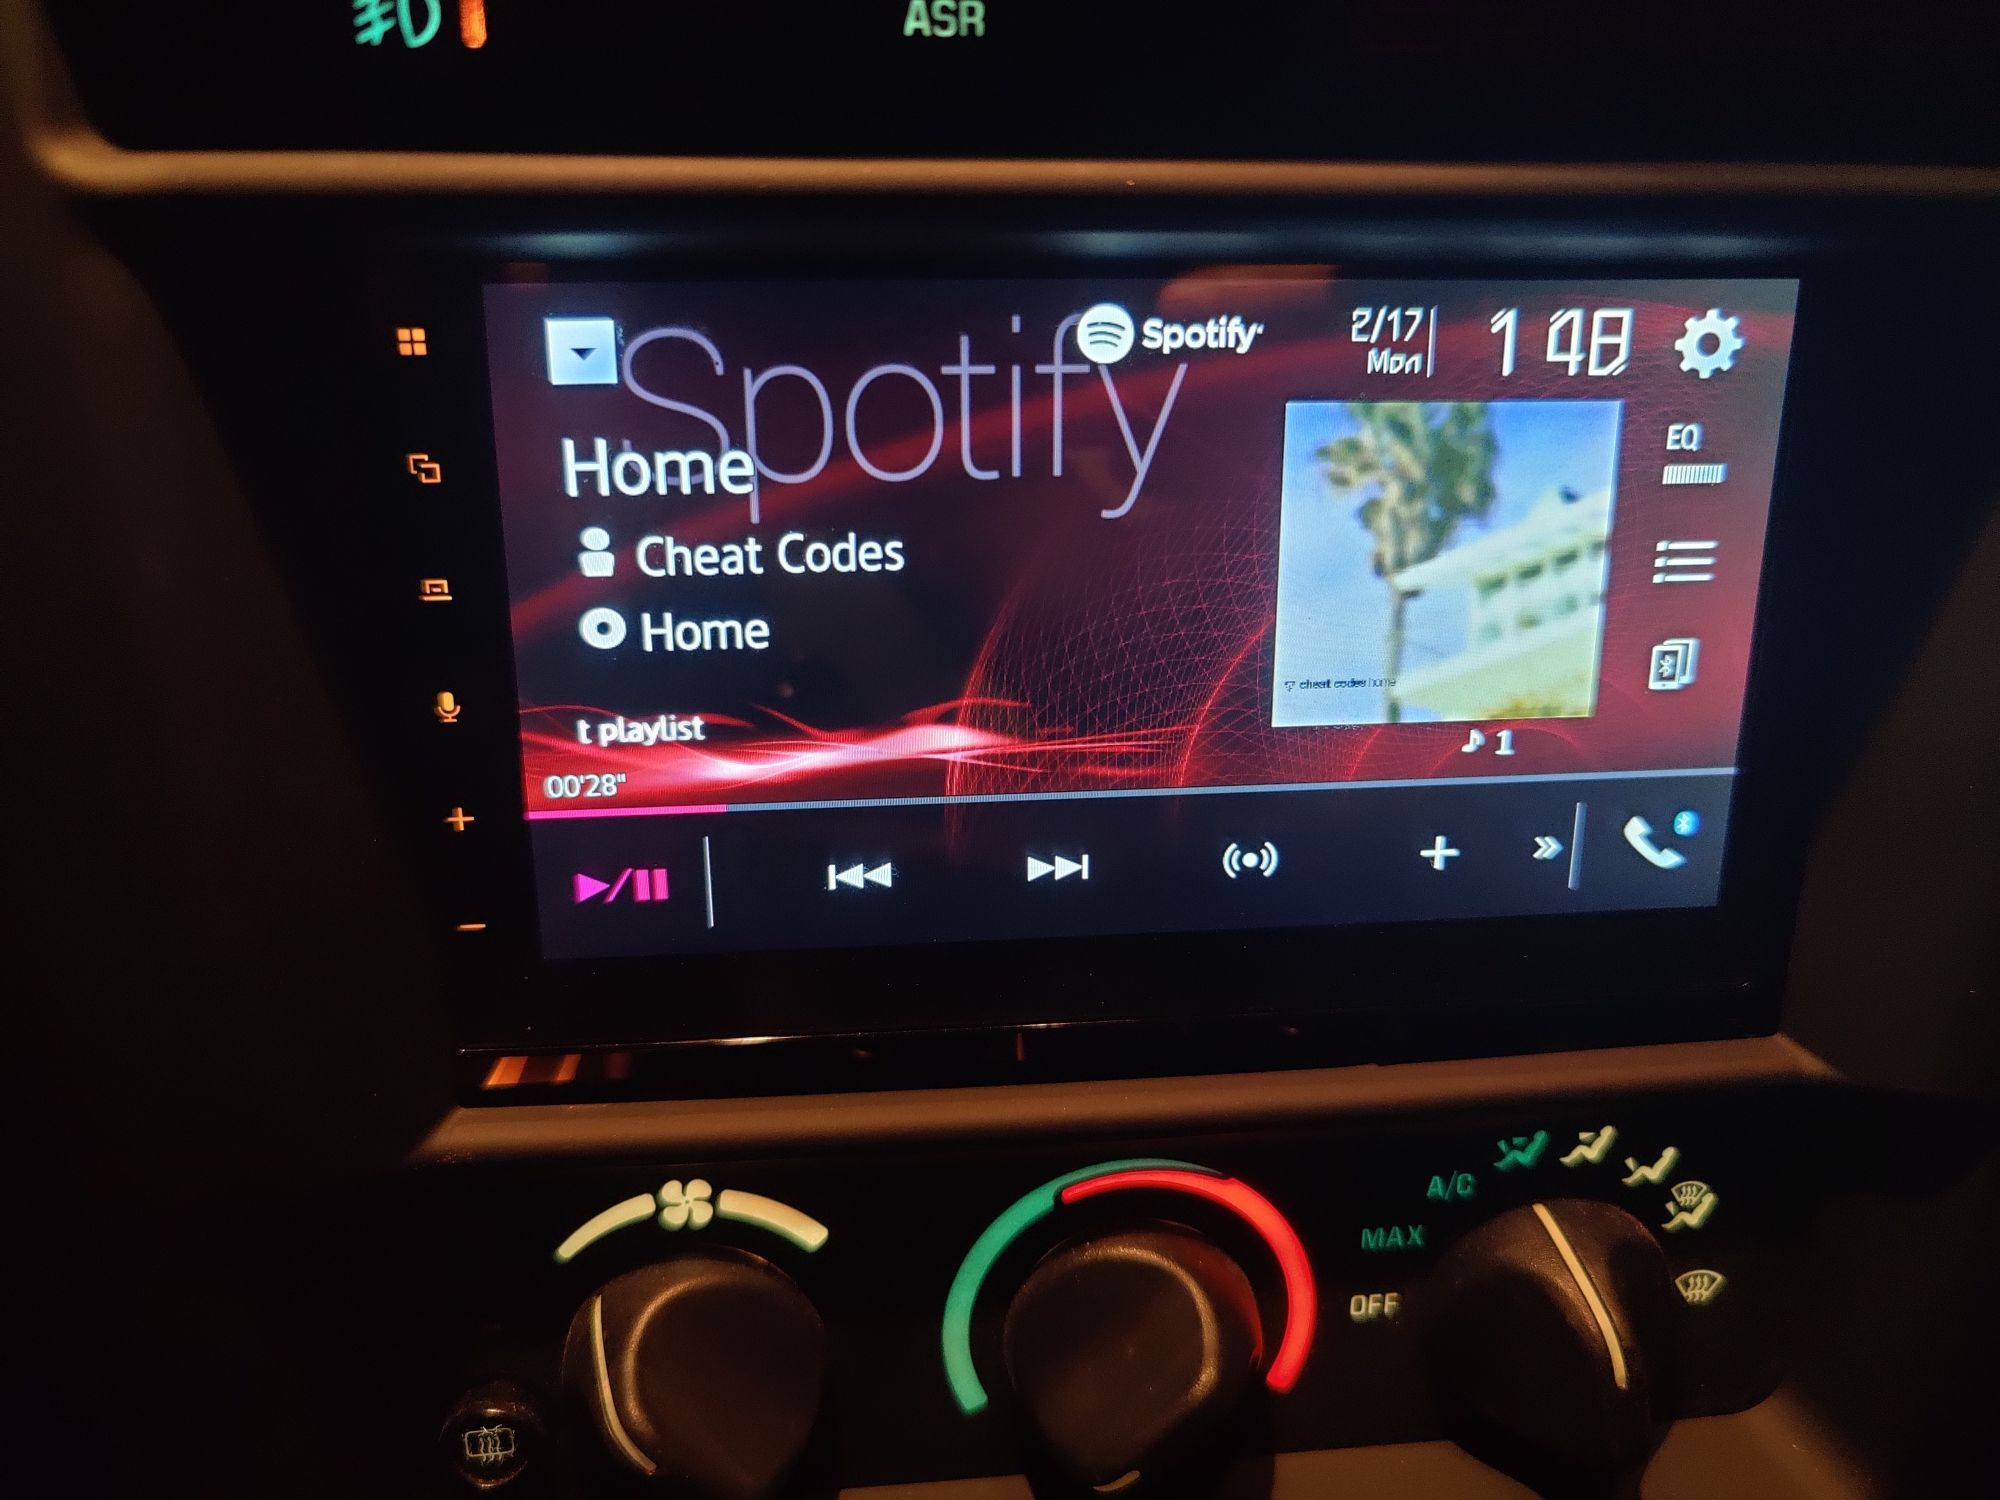 Connection issues with car stereo receivers - The Spotify Community